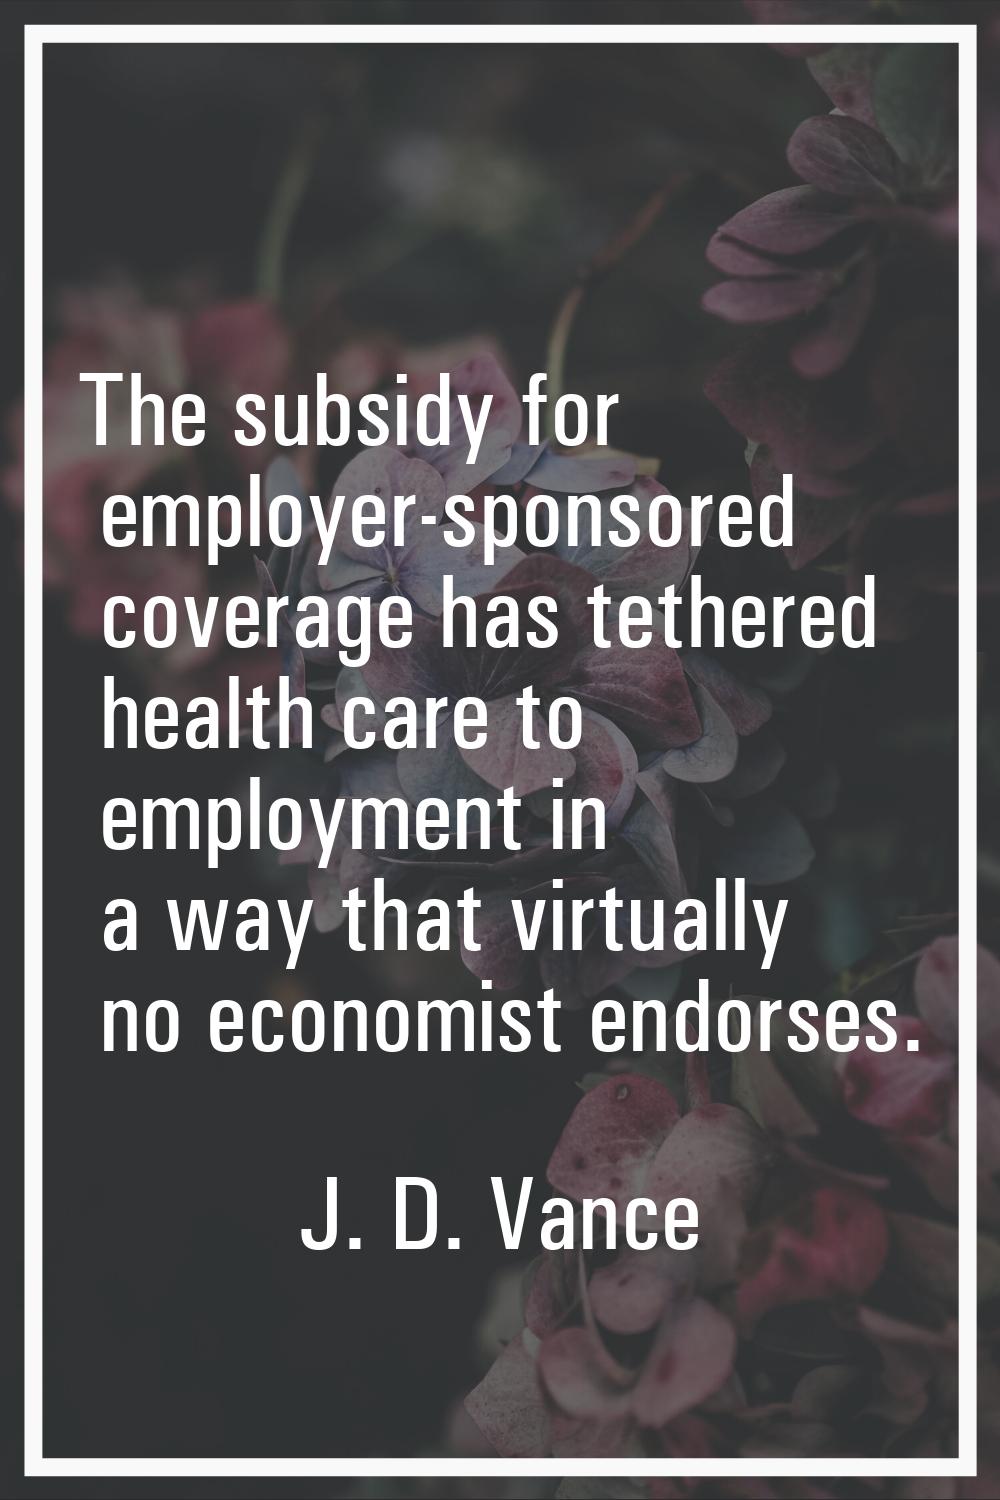 The subsidy for employer-sponsored coverage has tethered health care to employment in a way that vi